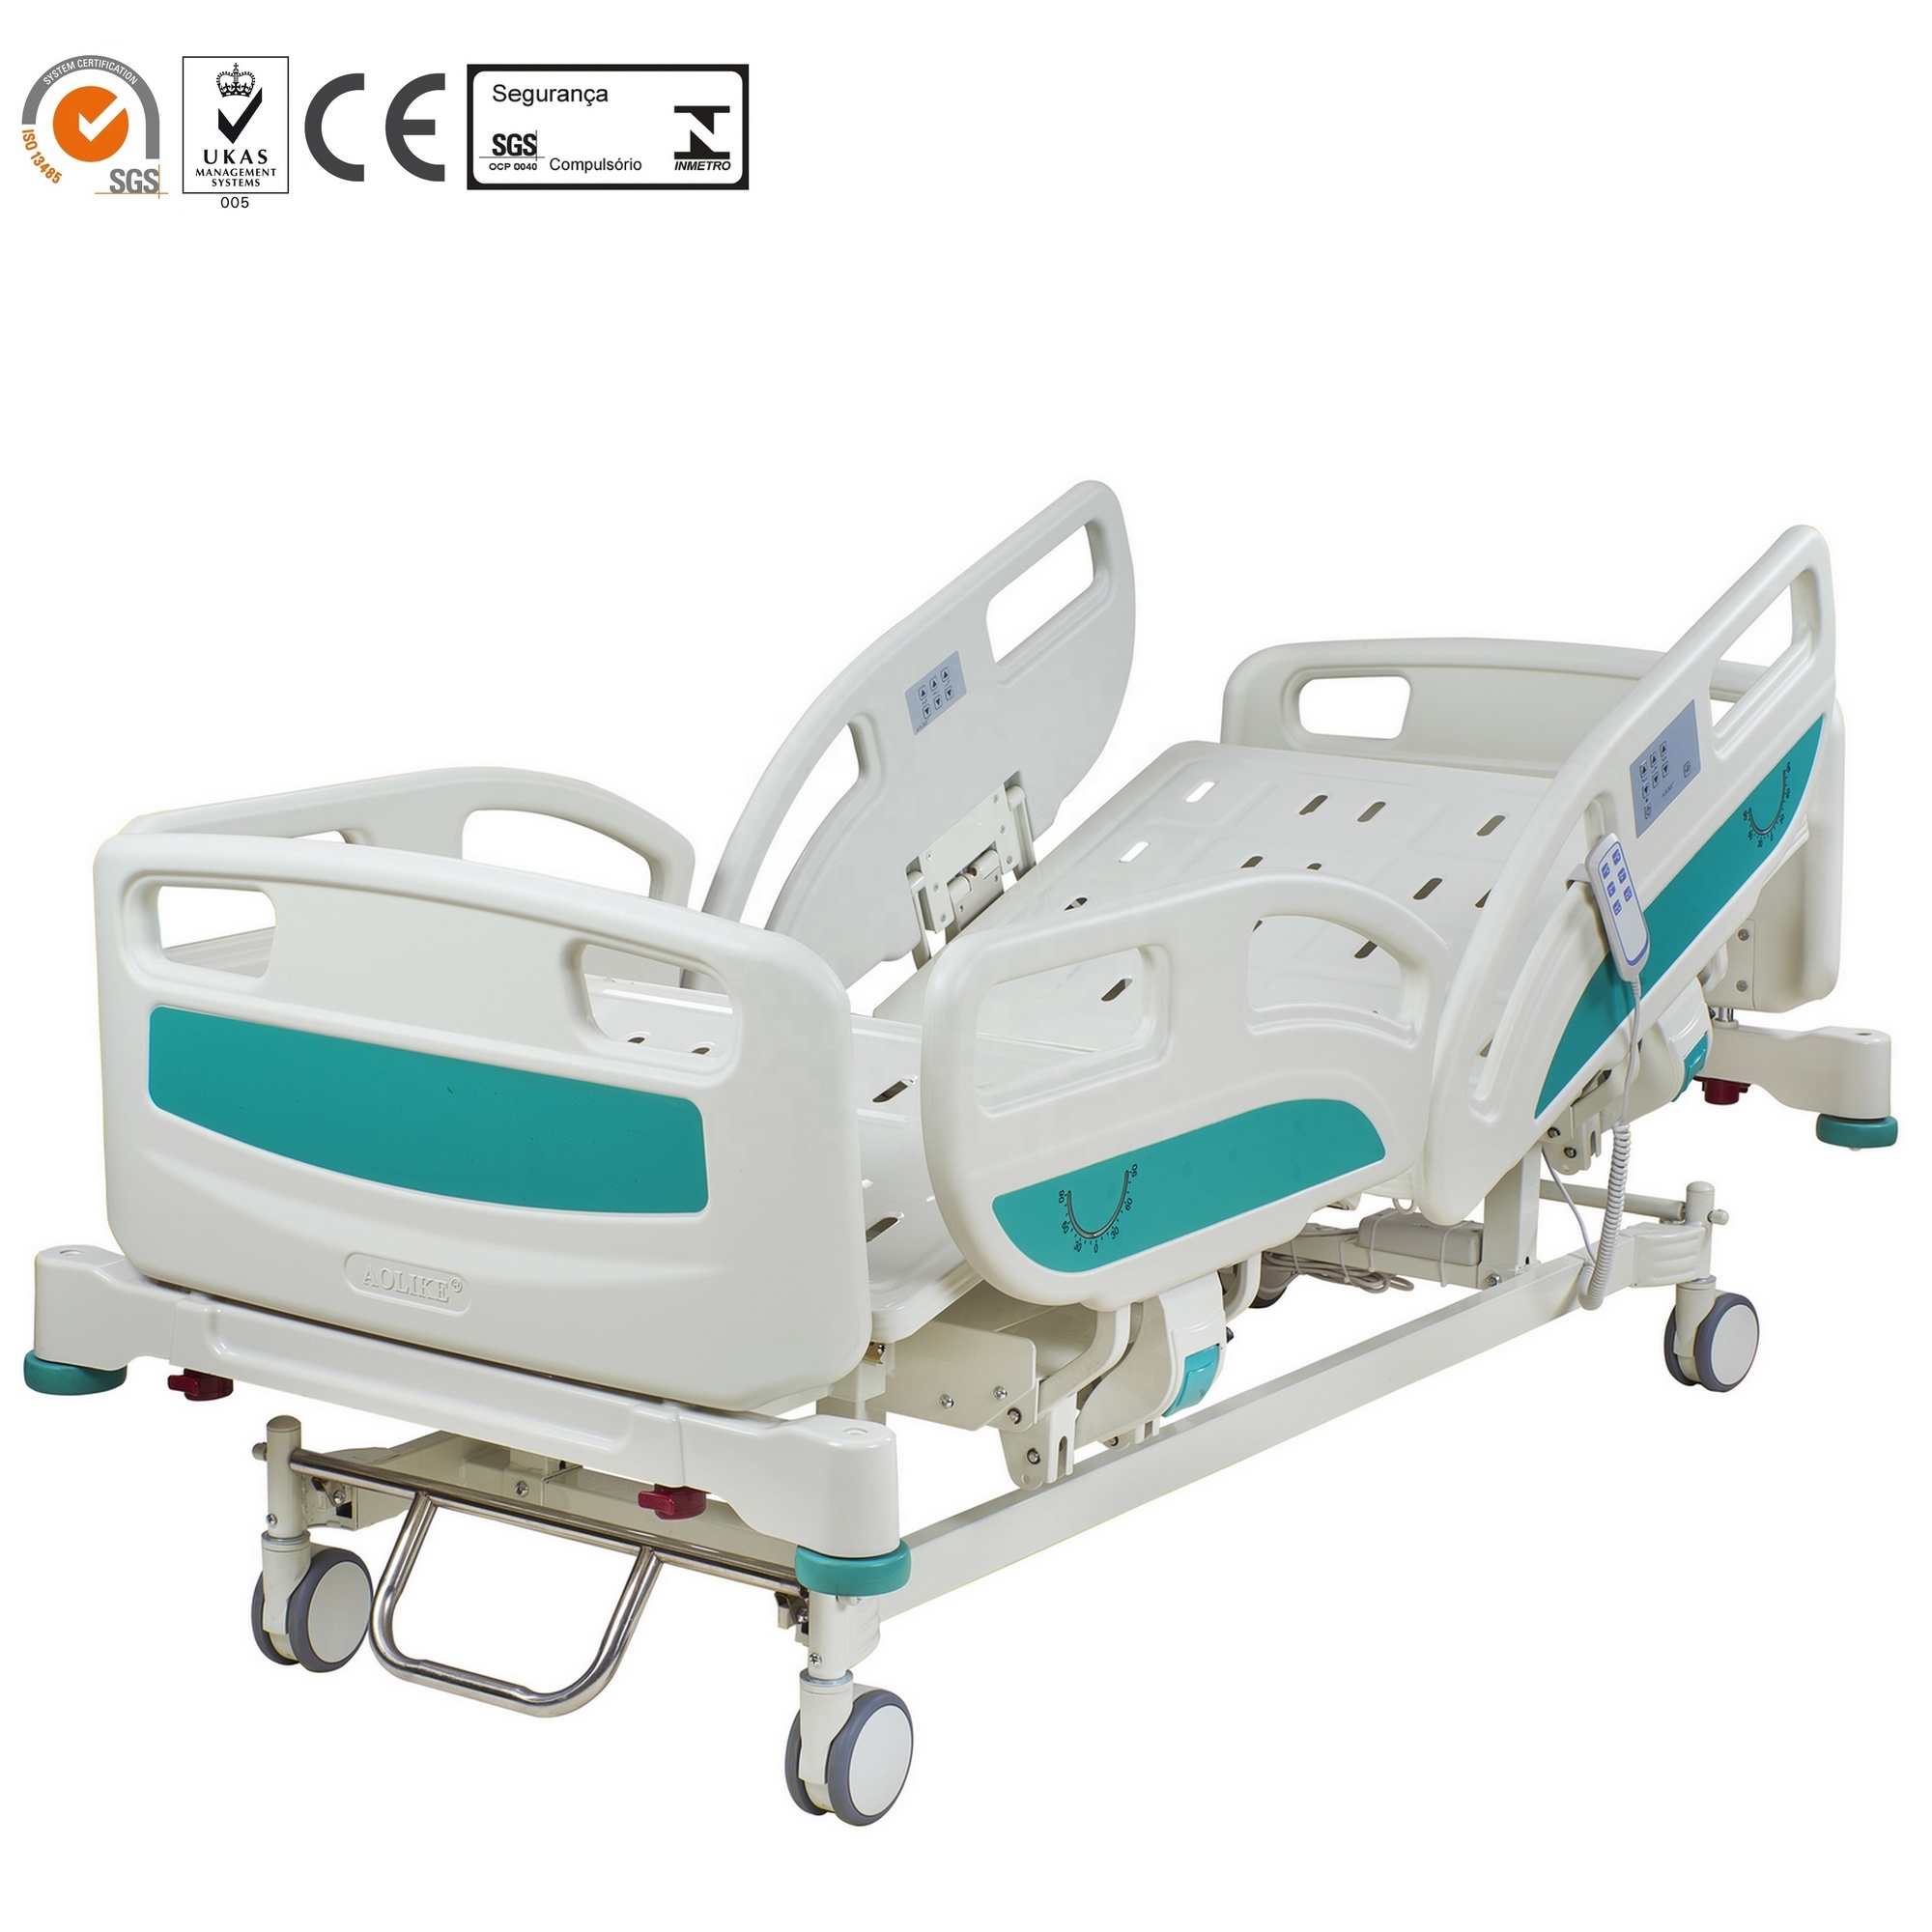 2020 New Products New Type Camas De Hospital ICU Electric Bed Metal for Hospital ALK-BA301EZE Accept OEM 1psc/ctn 1 Year,1 Year